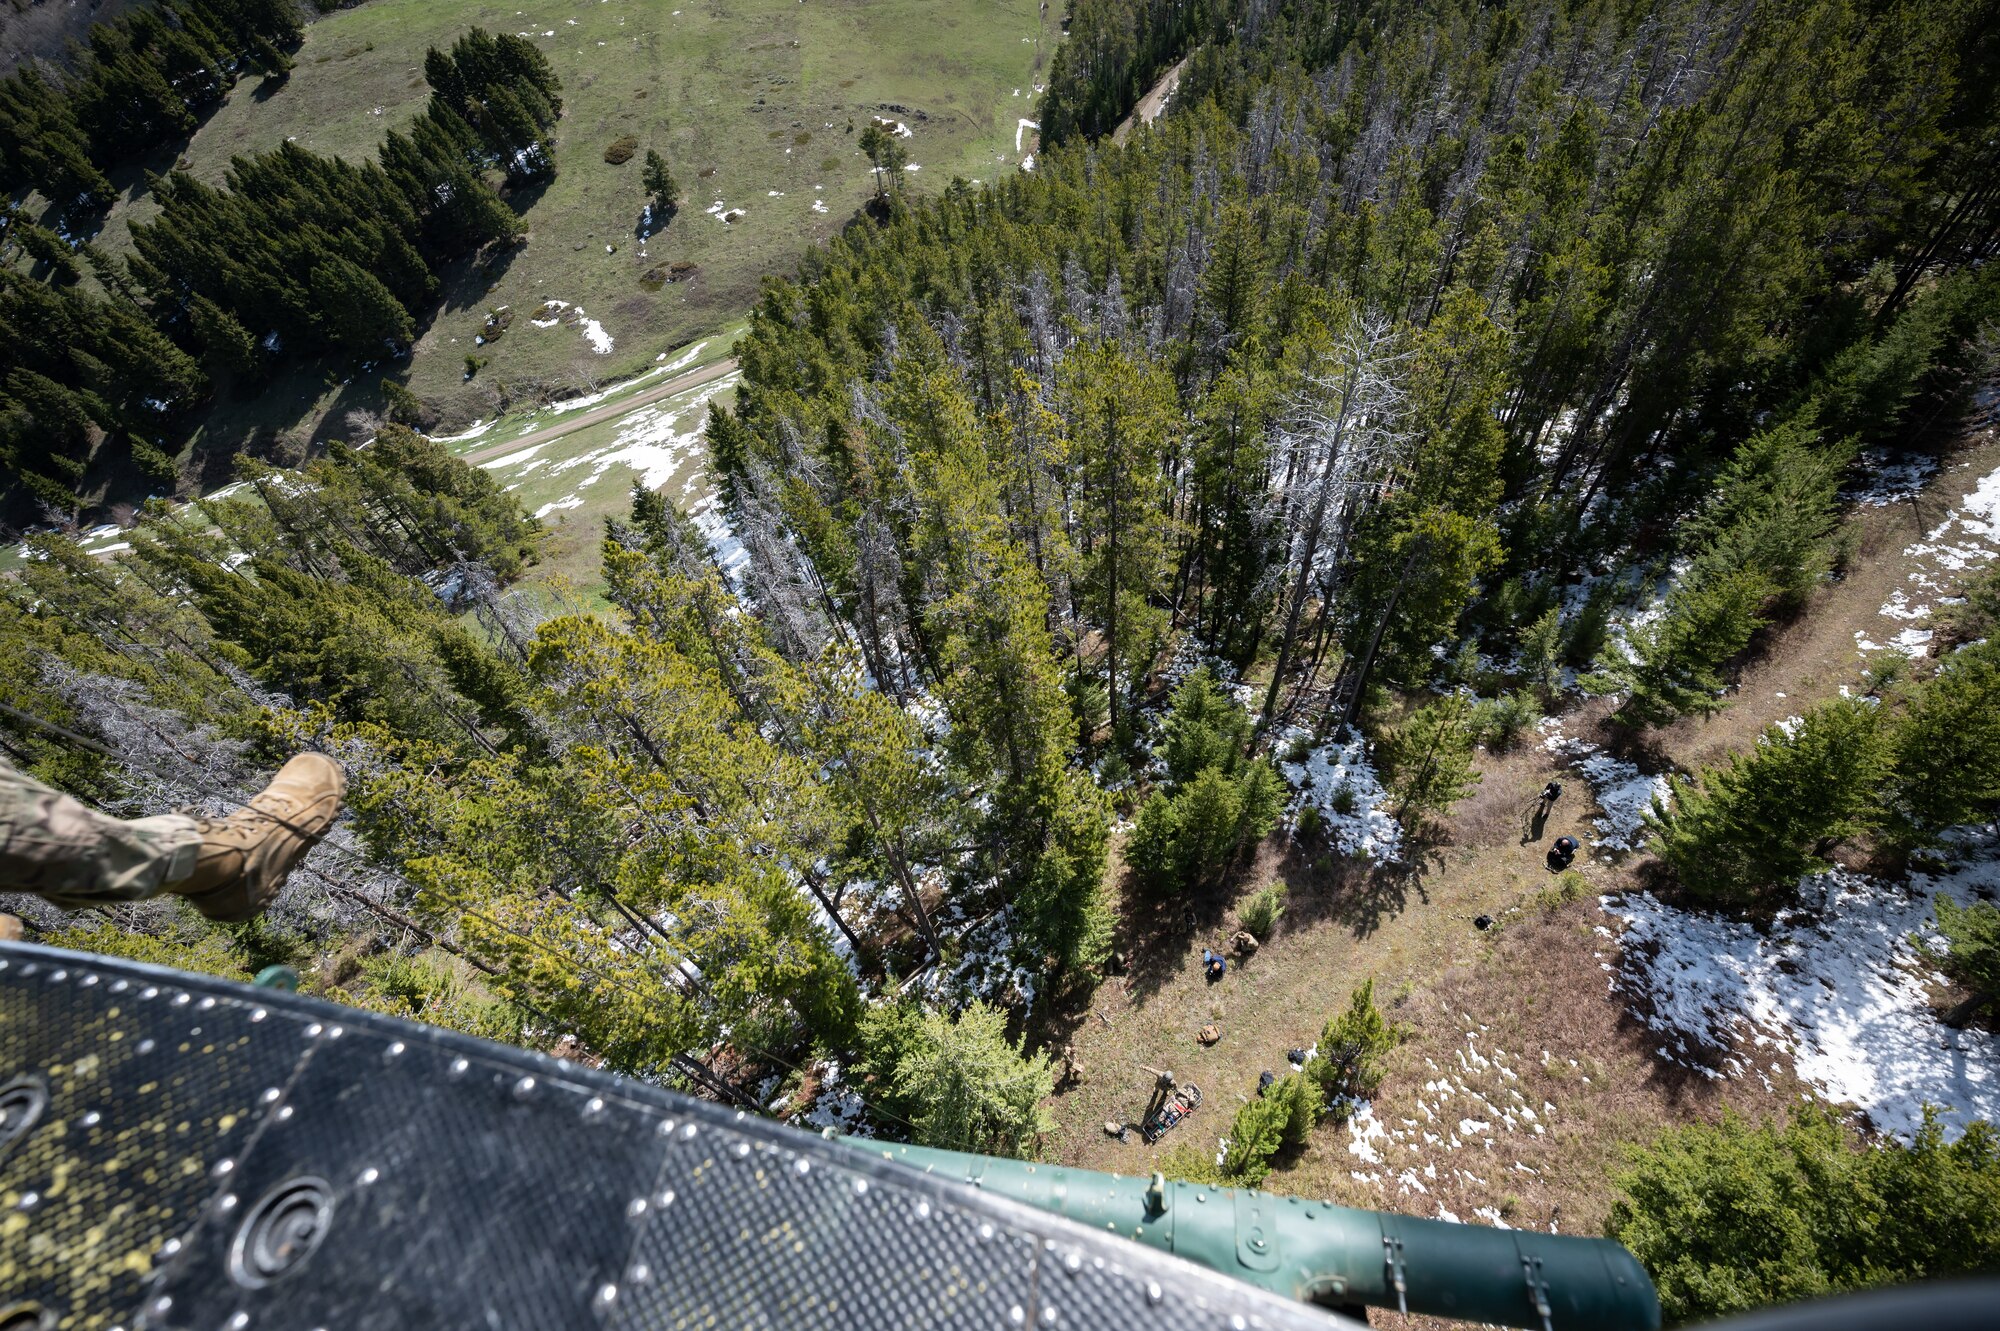 Members of the 40th Helicopter Squadron and 341st Missile Wing prepare to hoist a simulated patient onto a UH-1N Huey helicopter during a search and rescue exercise May 24, 2022, in the Highwood Mountains near Great Falls, Mont.